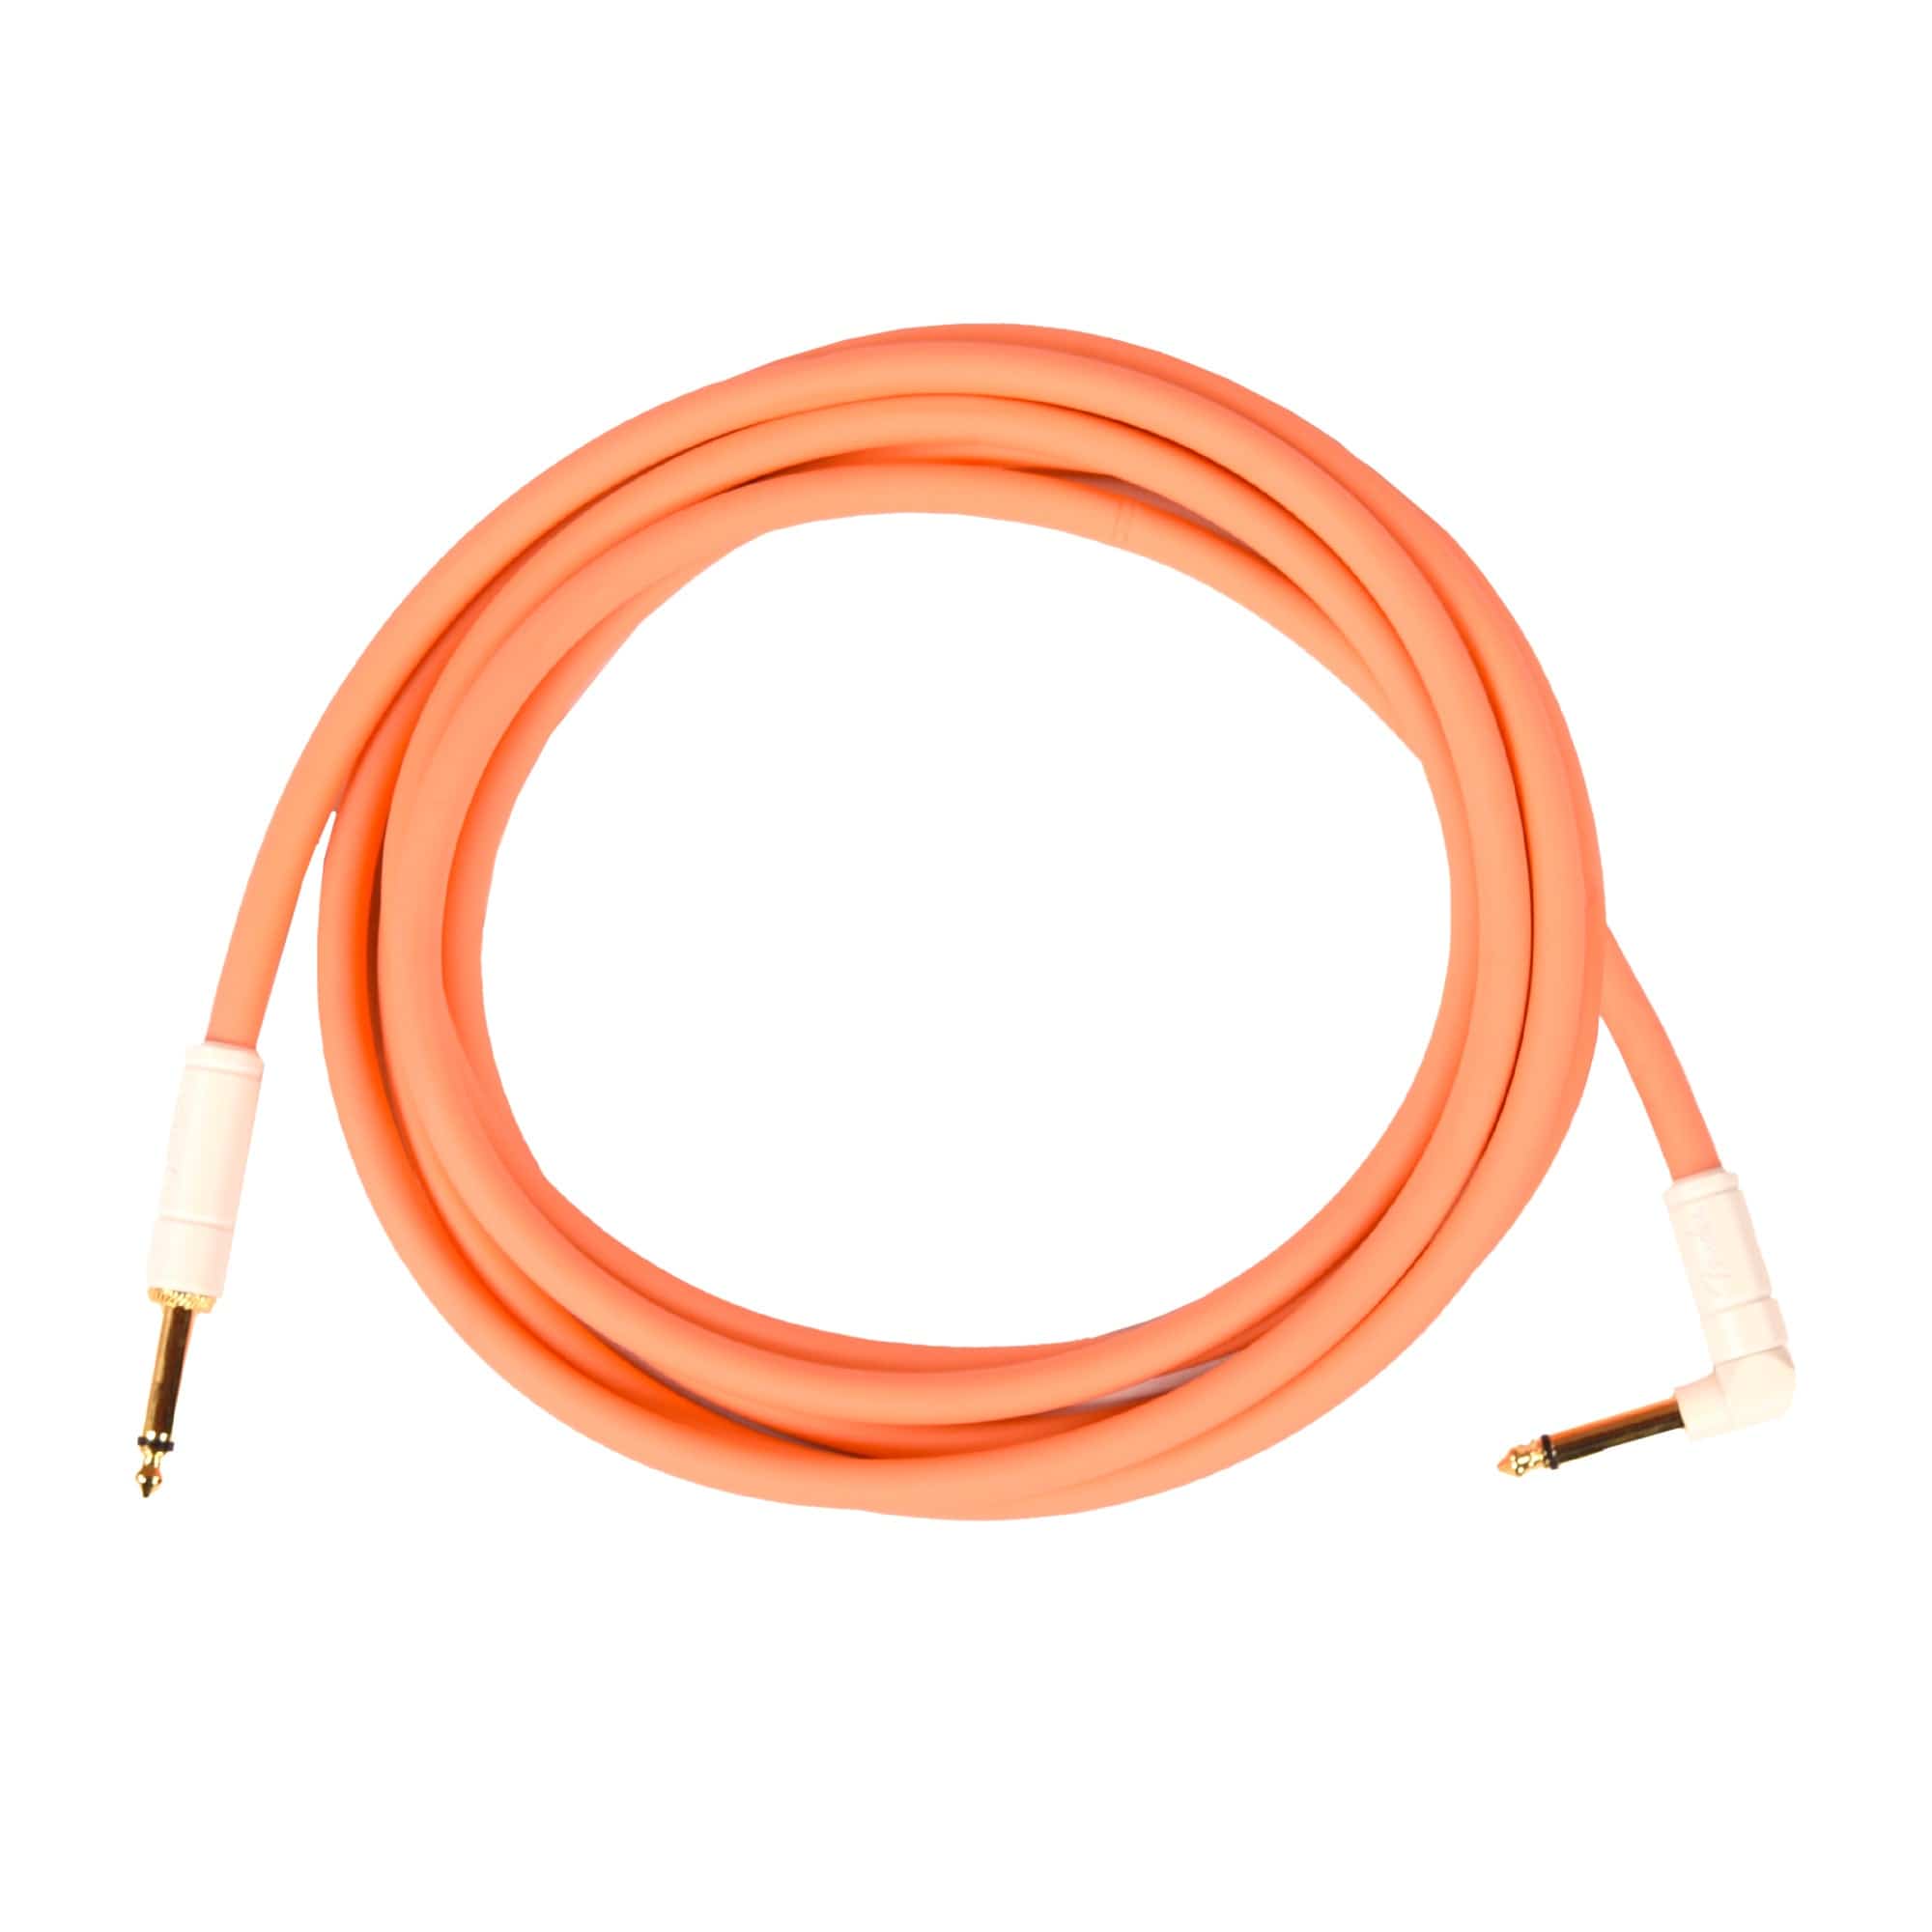 Fender Deluxe Instrument Cable Pacific Peach 10' Angle-Straight Accessories / Cables